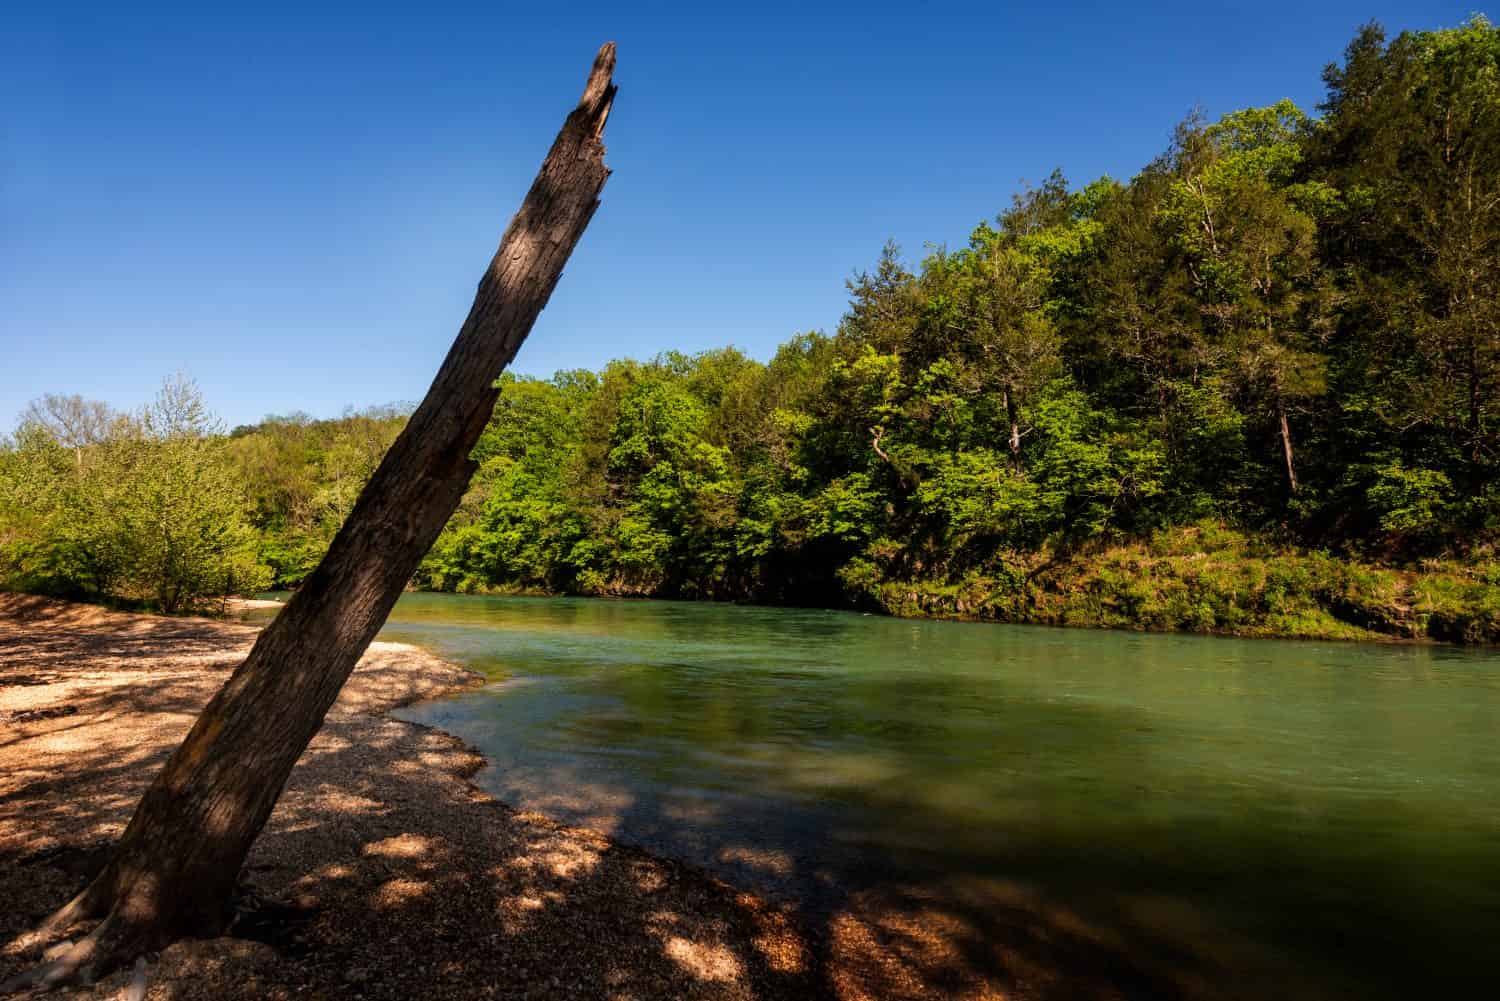 The Current River runs through a wilderness area in the Ozarks north of Eminence, Missouri, USA, on May 12, 2021.